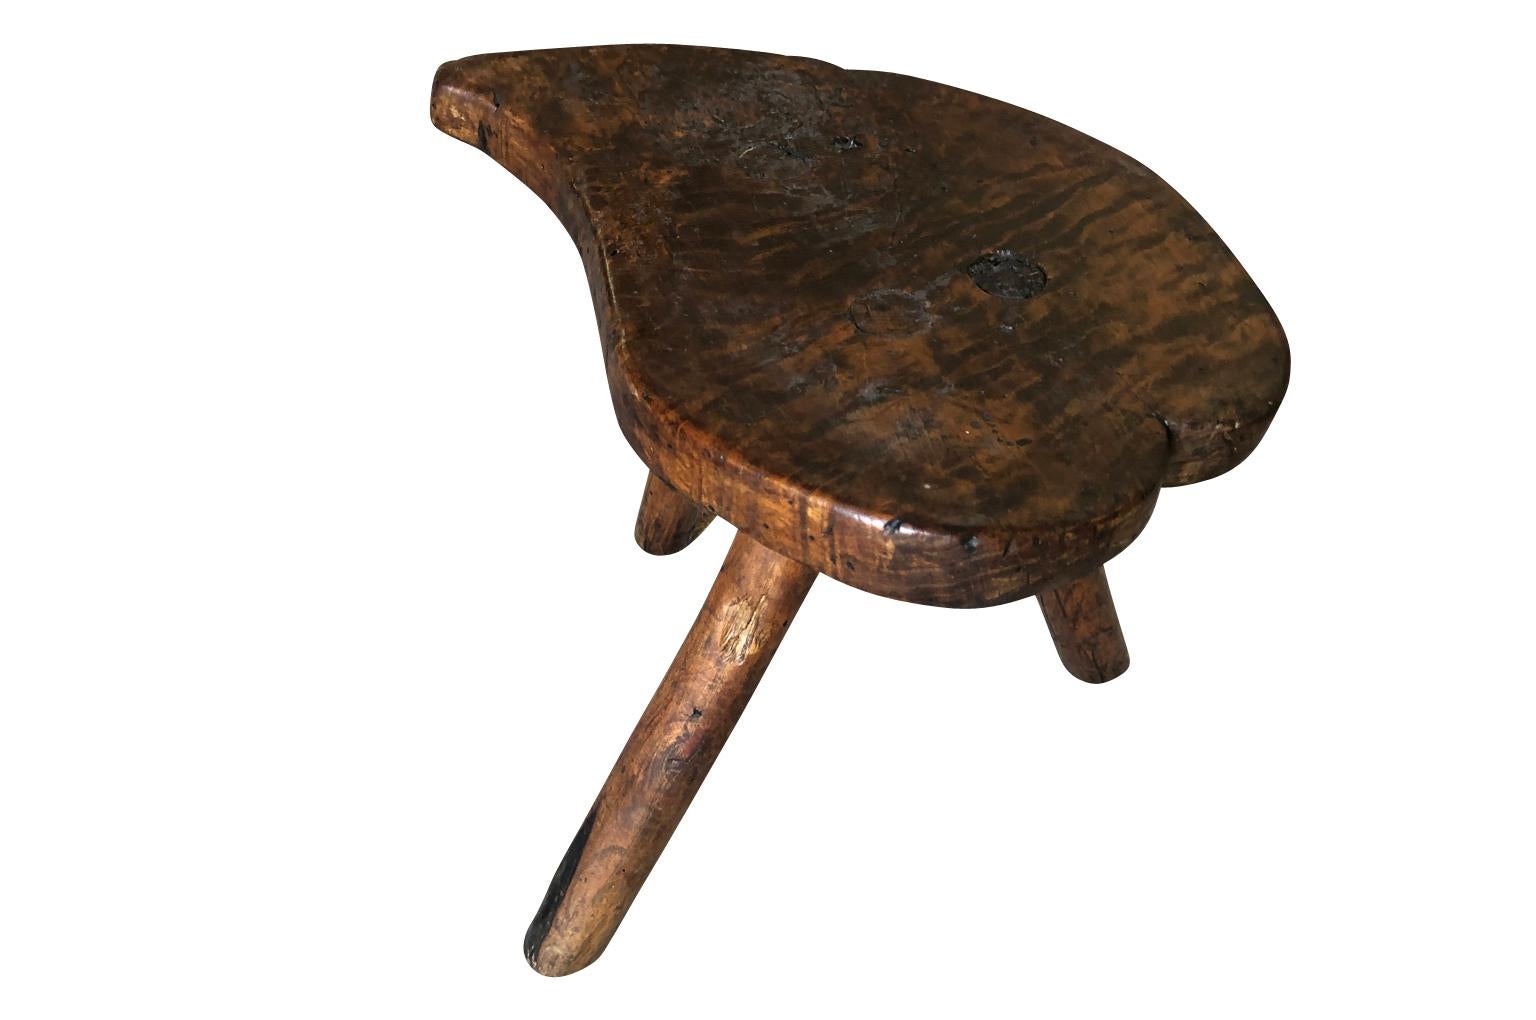 A delightful and primitive 19th century milking stool from the Catalan region of Spain. Wonderful patina and graining. A charming accent piece for any casual interior.